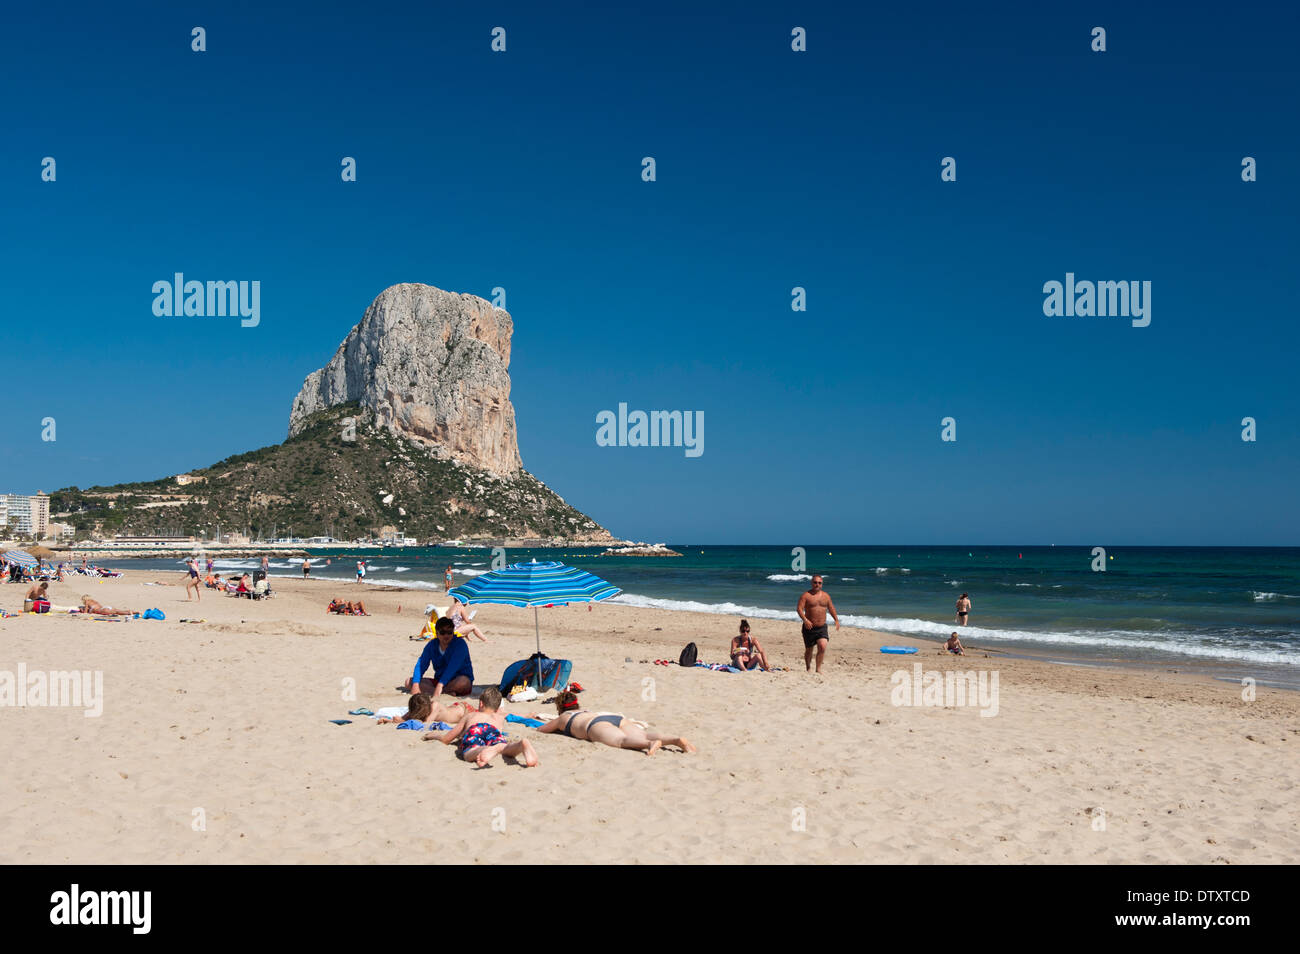 The imposing Penyal d'lfac outcrop in the bay of Calp, Costa Brava, Spain, with people on the beach in the foreground. Stock Photo